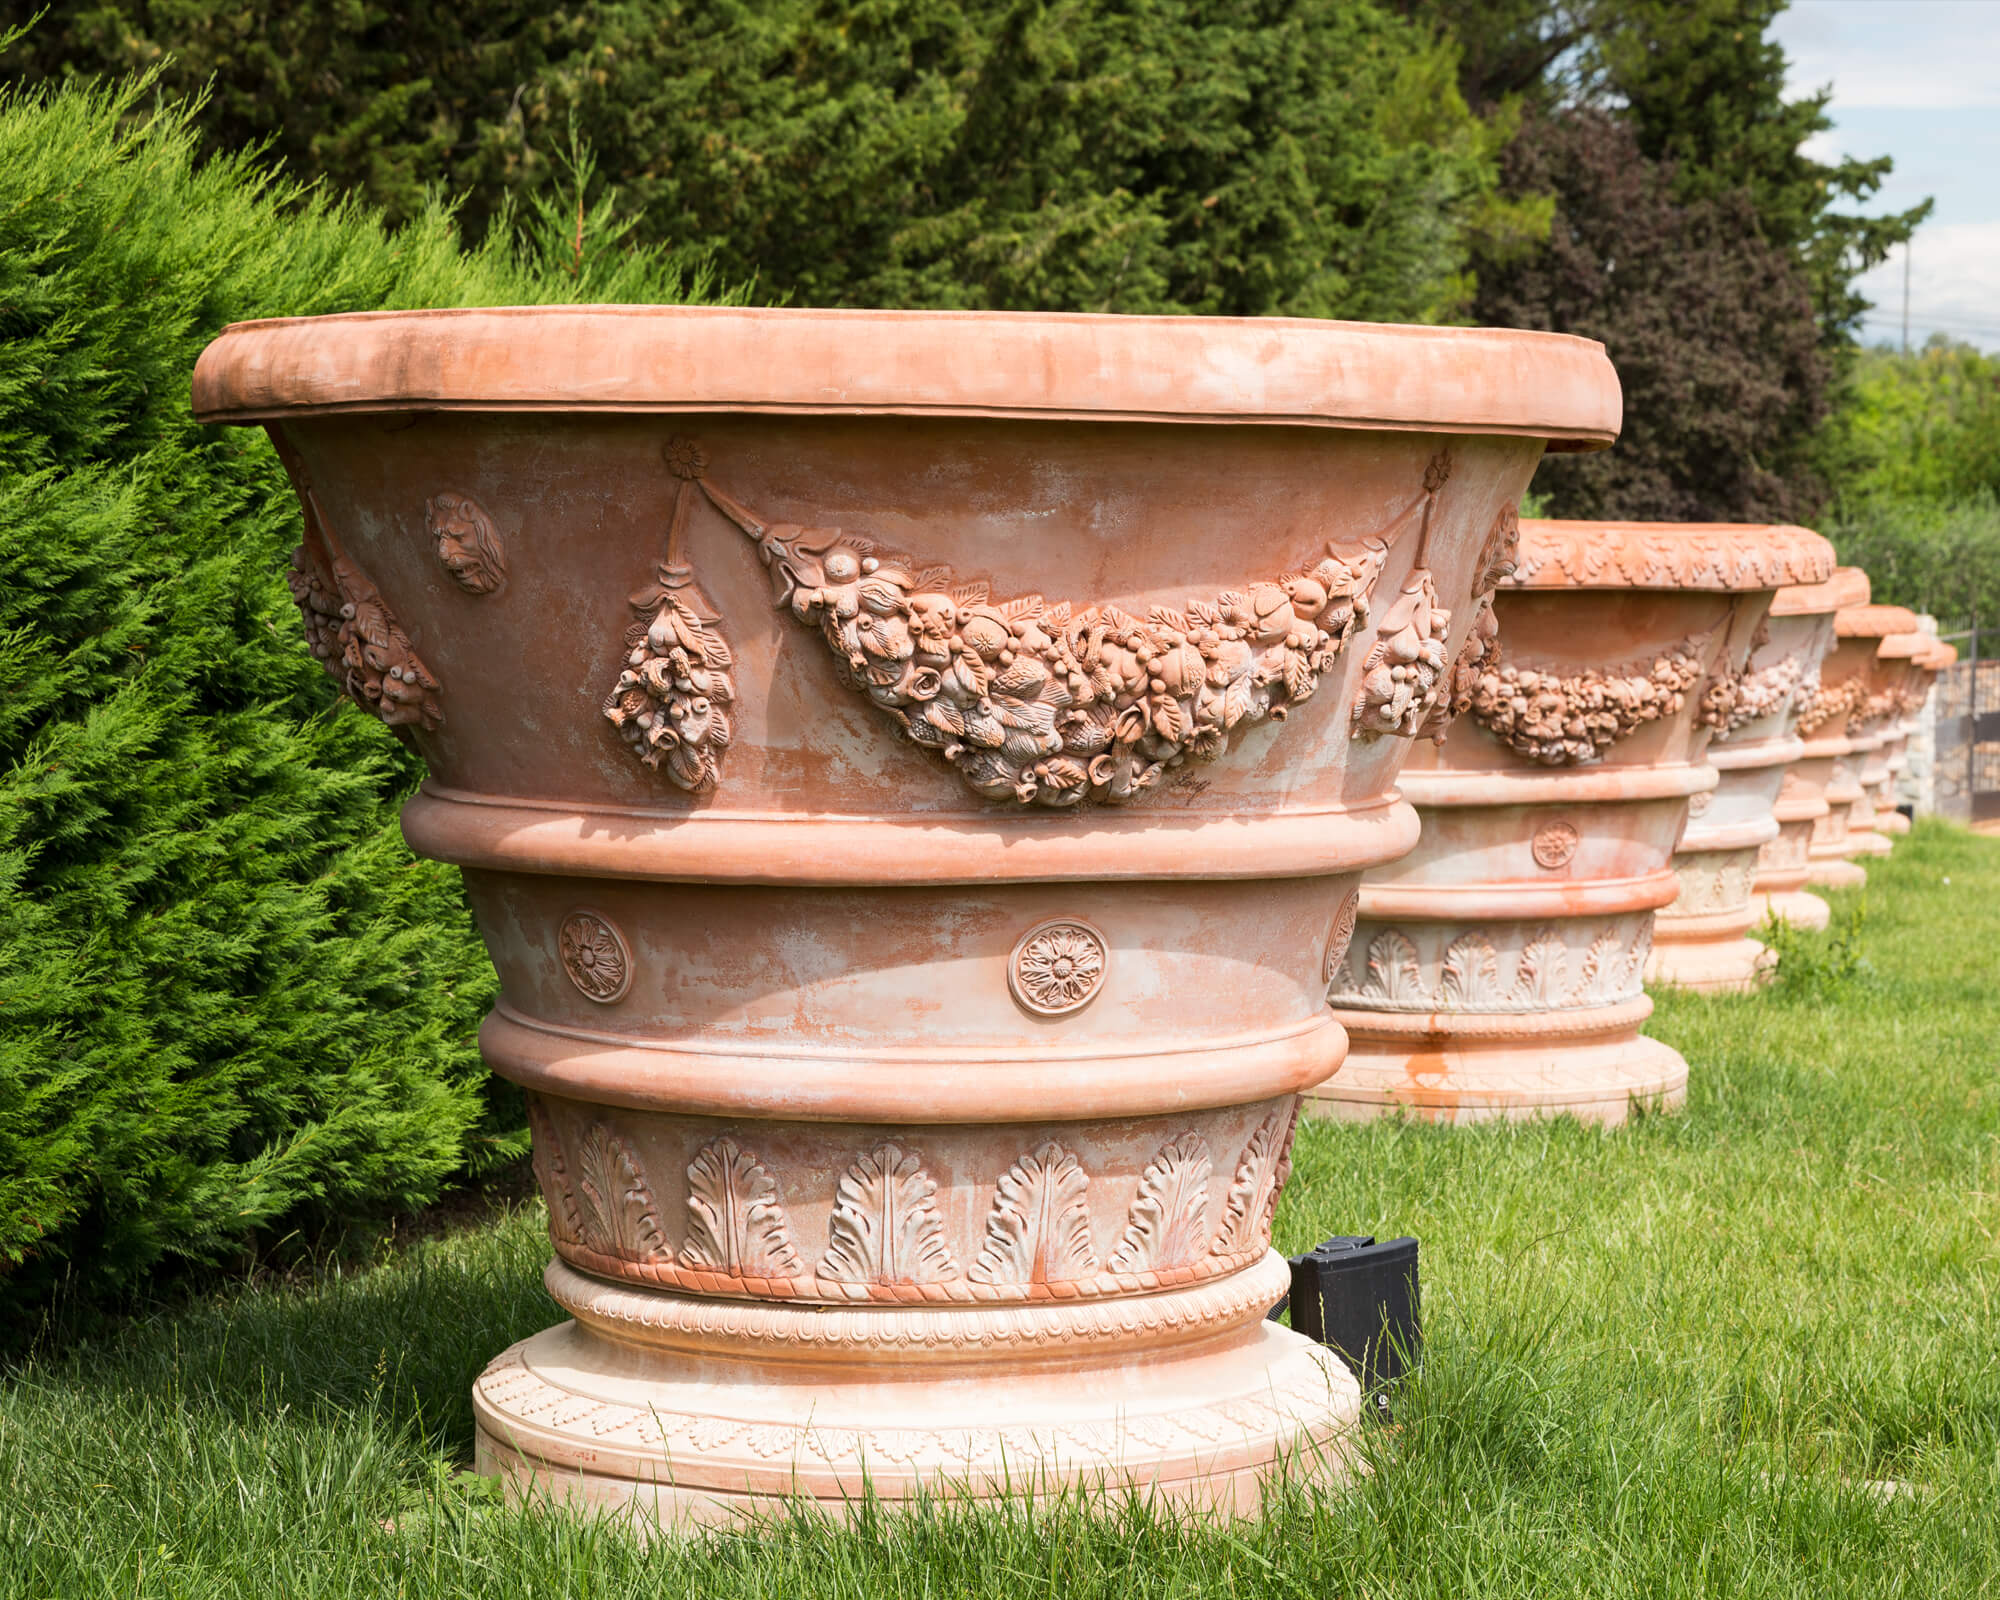 Caring for Terracotta Pots